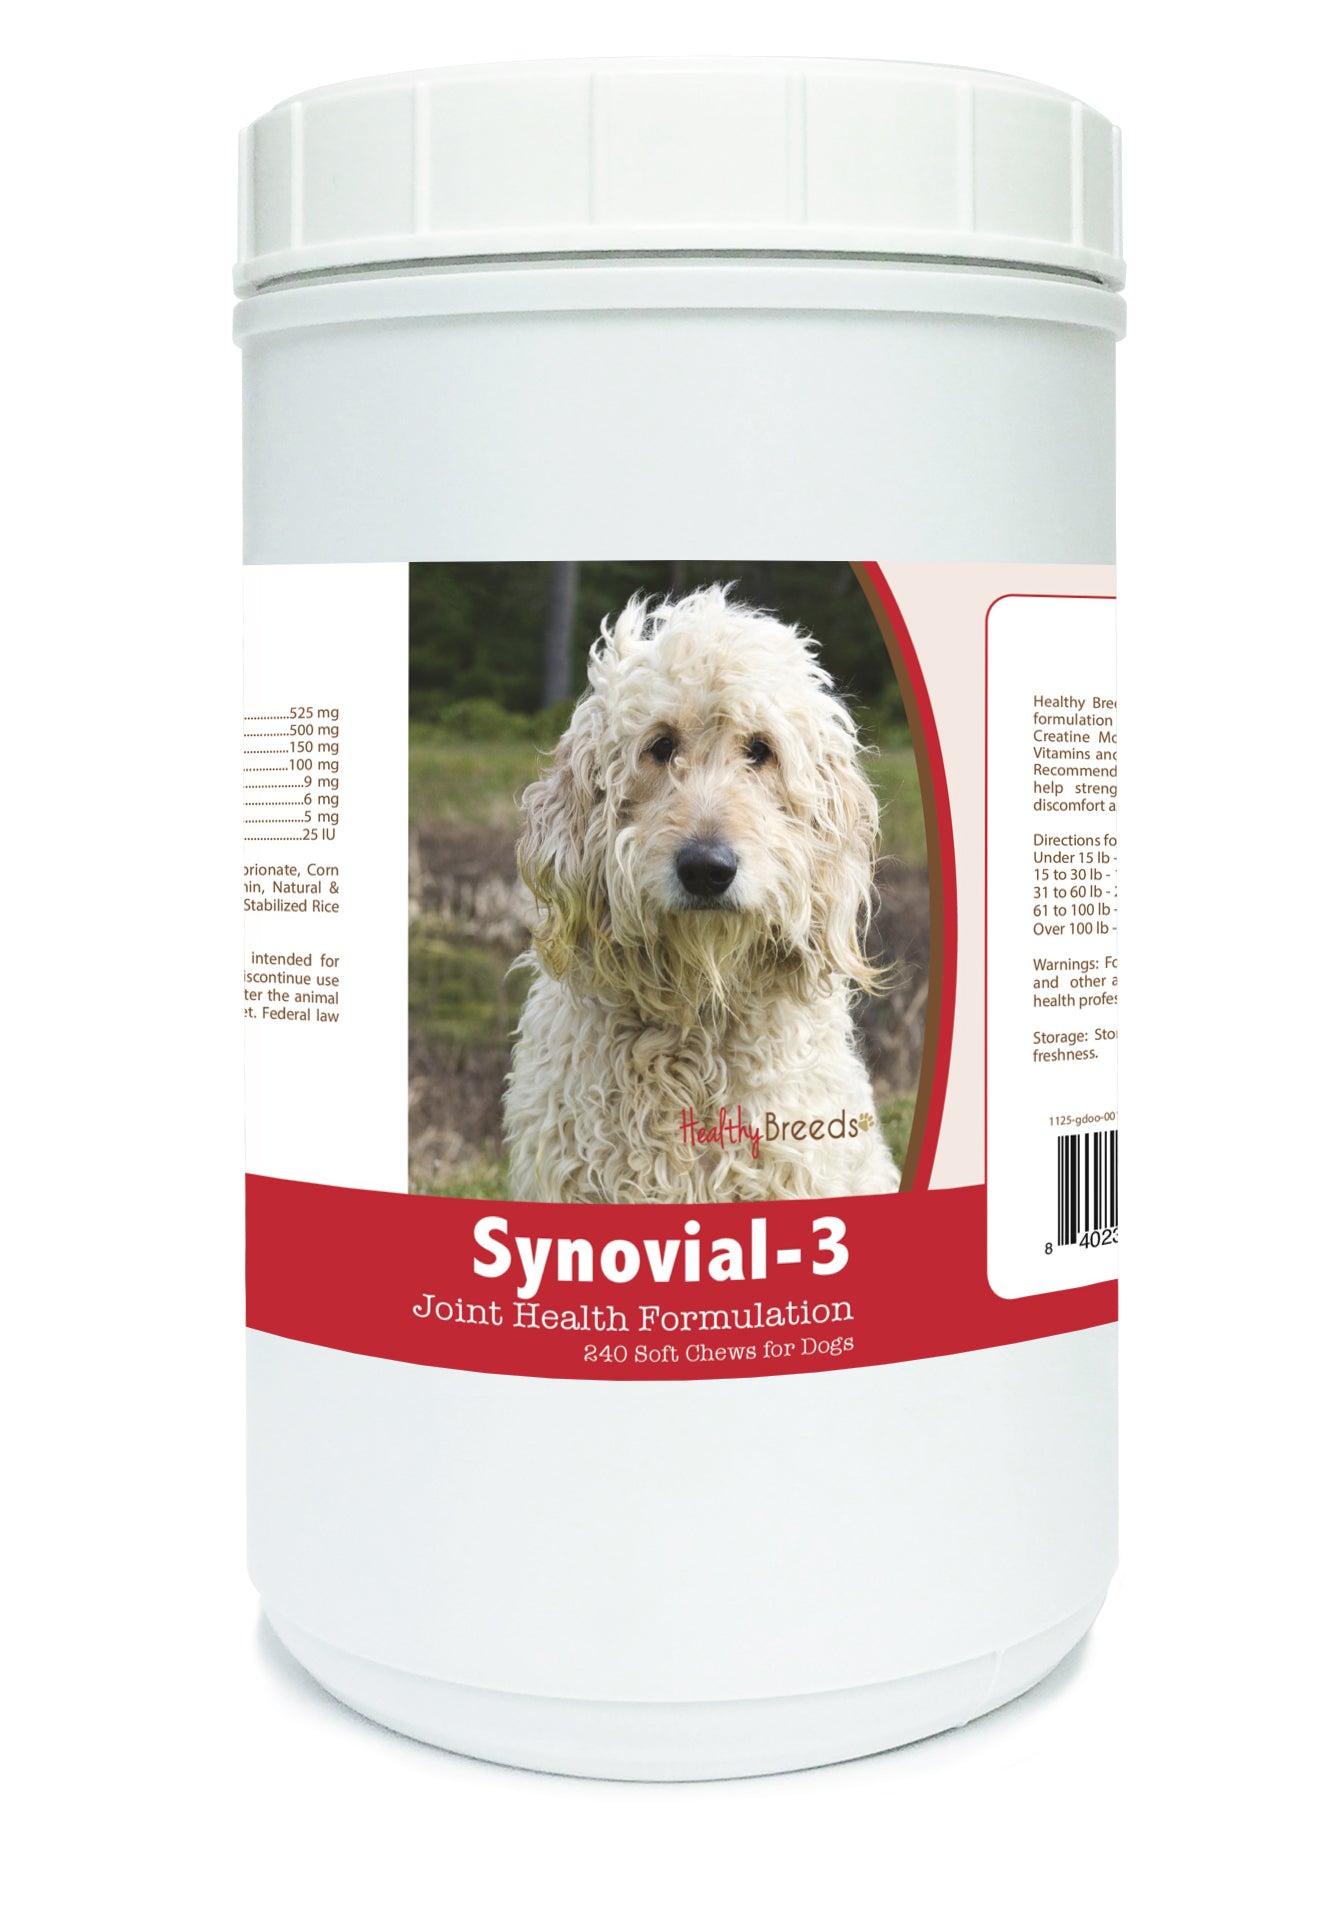 Goldendoodle Synovial-3 Joint Health Formulation Soft Chews 240 Count